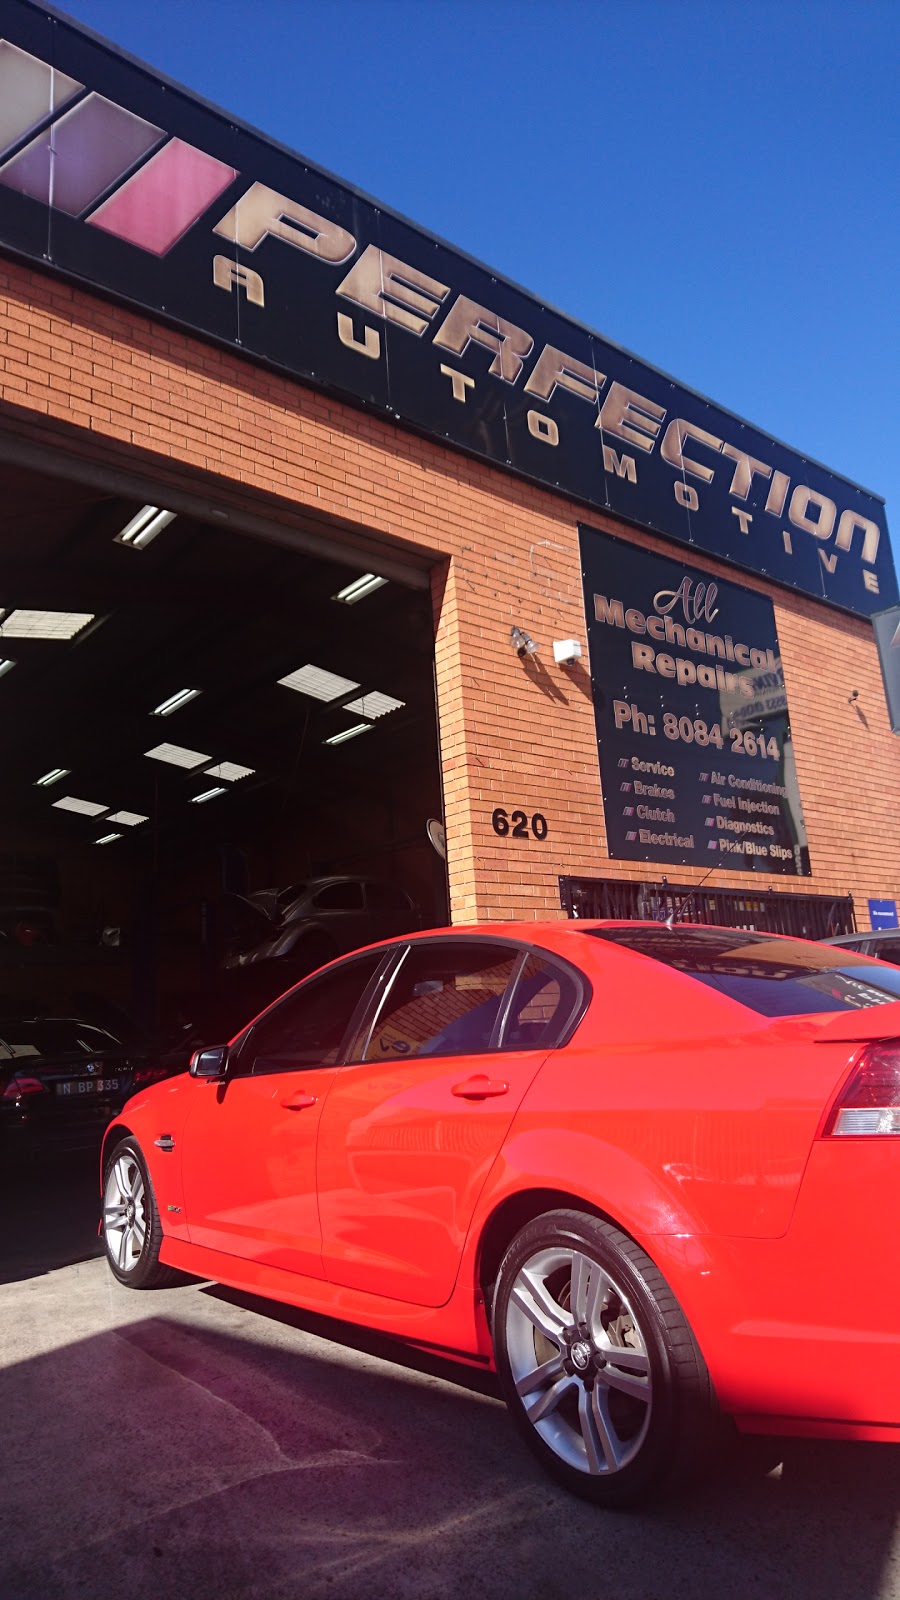 Perfection Automotive | 620 Forest Rd, Bexley NSW 2207, Australia | Phone: (02) 8084 2614